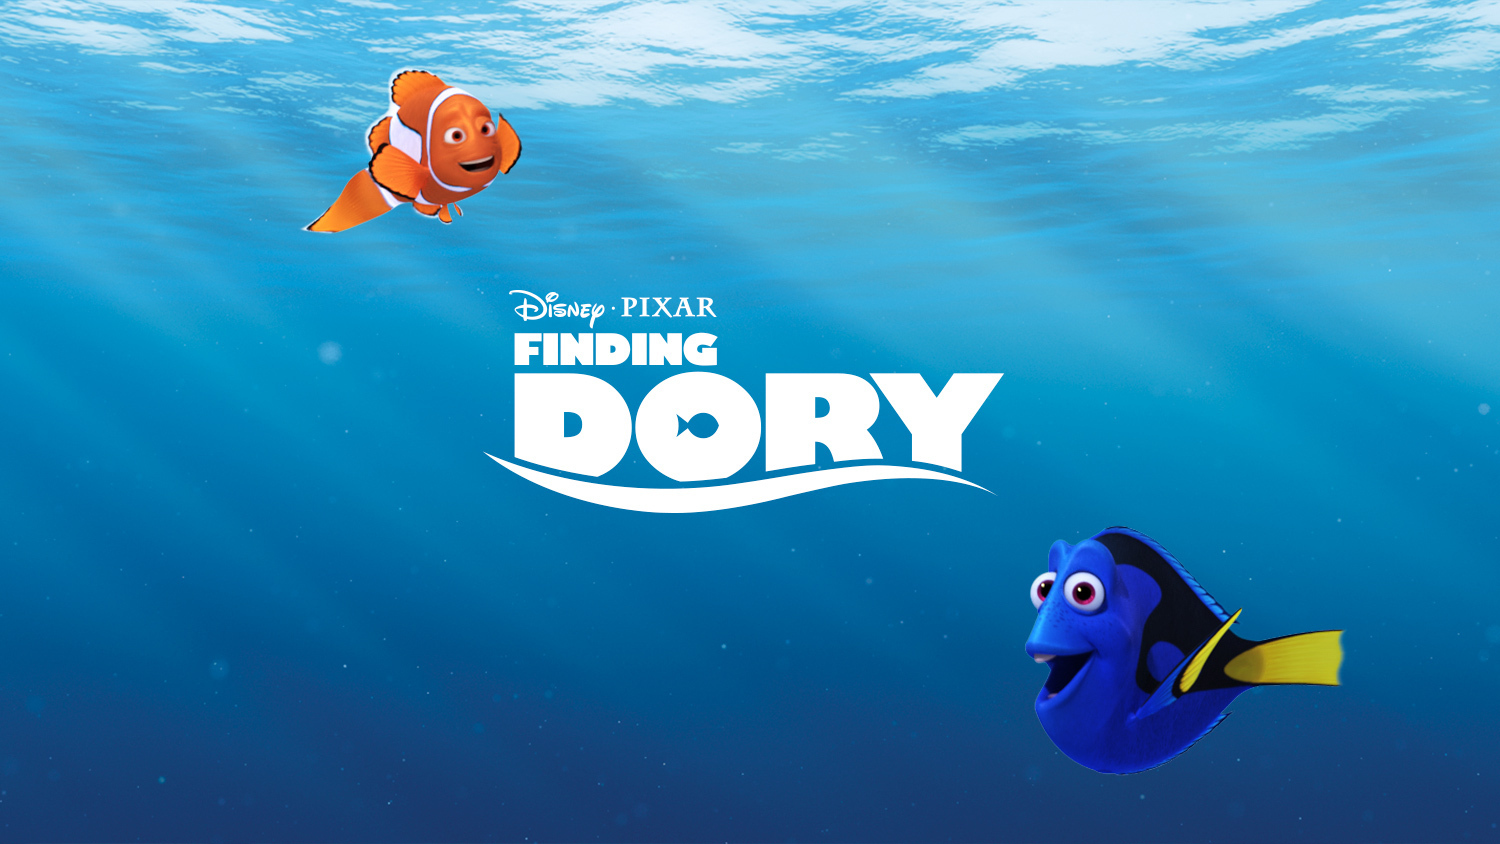 Groundbreaking Service For Low Vision and Blind Audiences of Finding Dory